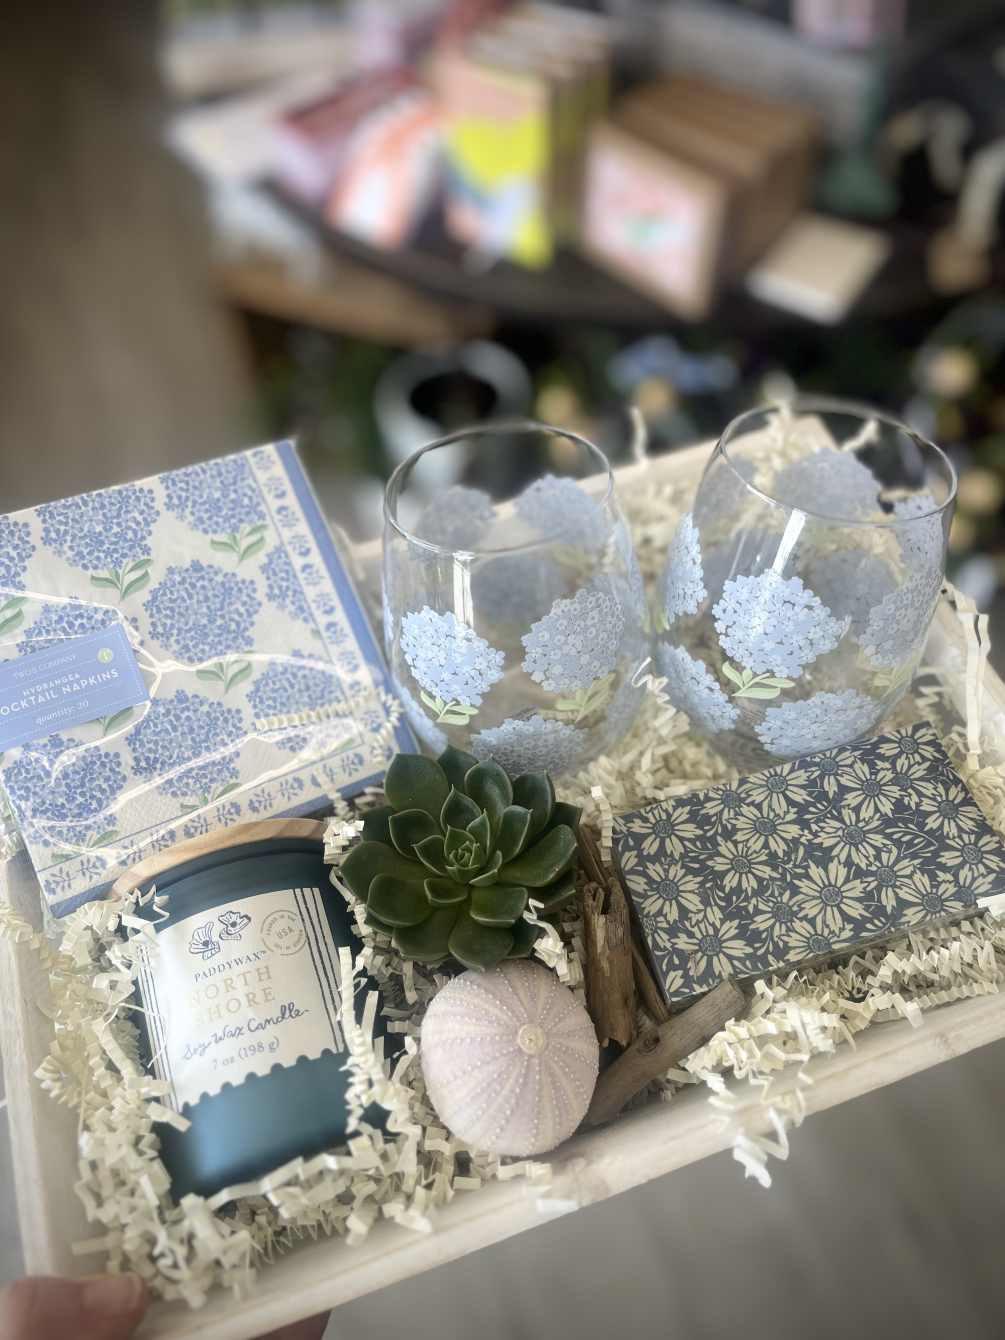 Send greetings from the Northshore with this beautiful, summer-themed gift box. A